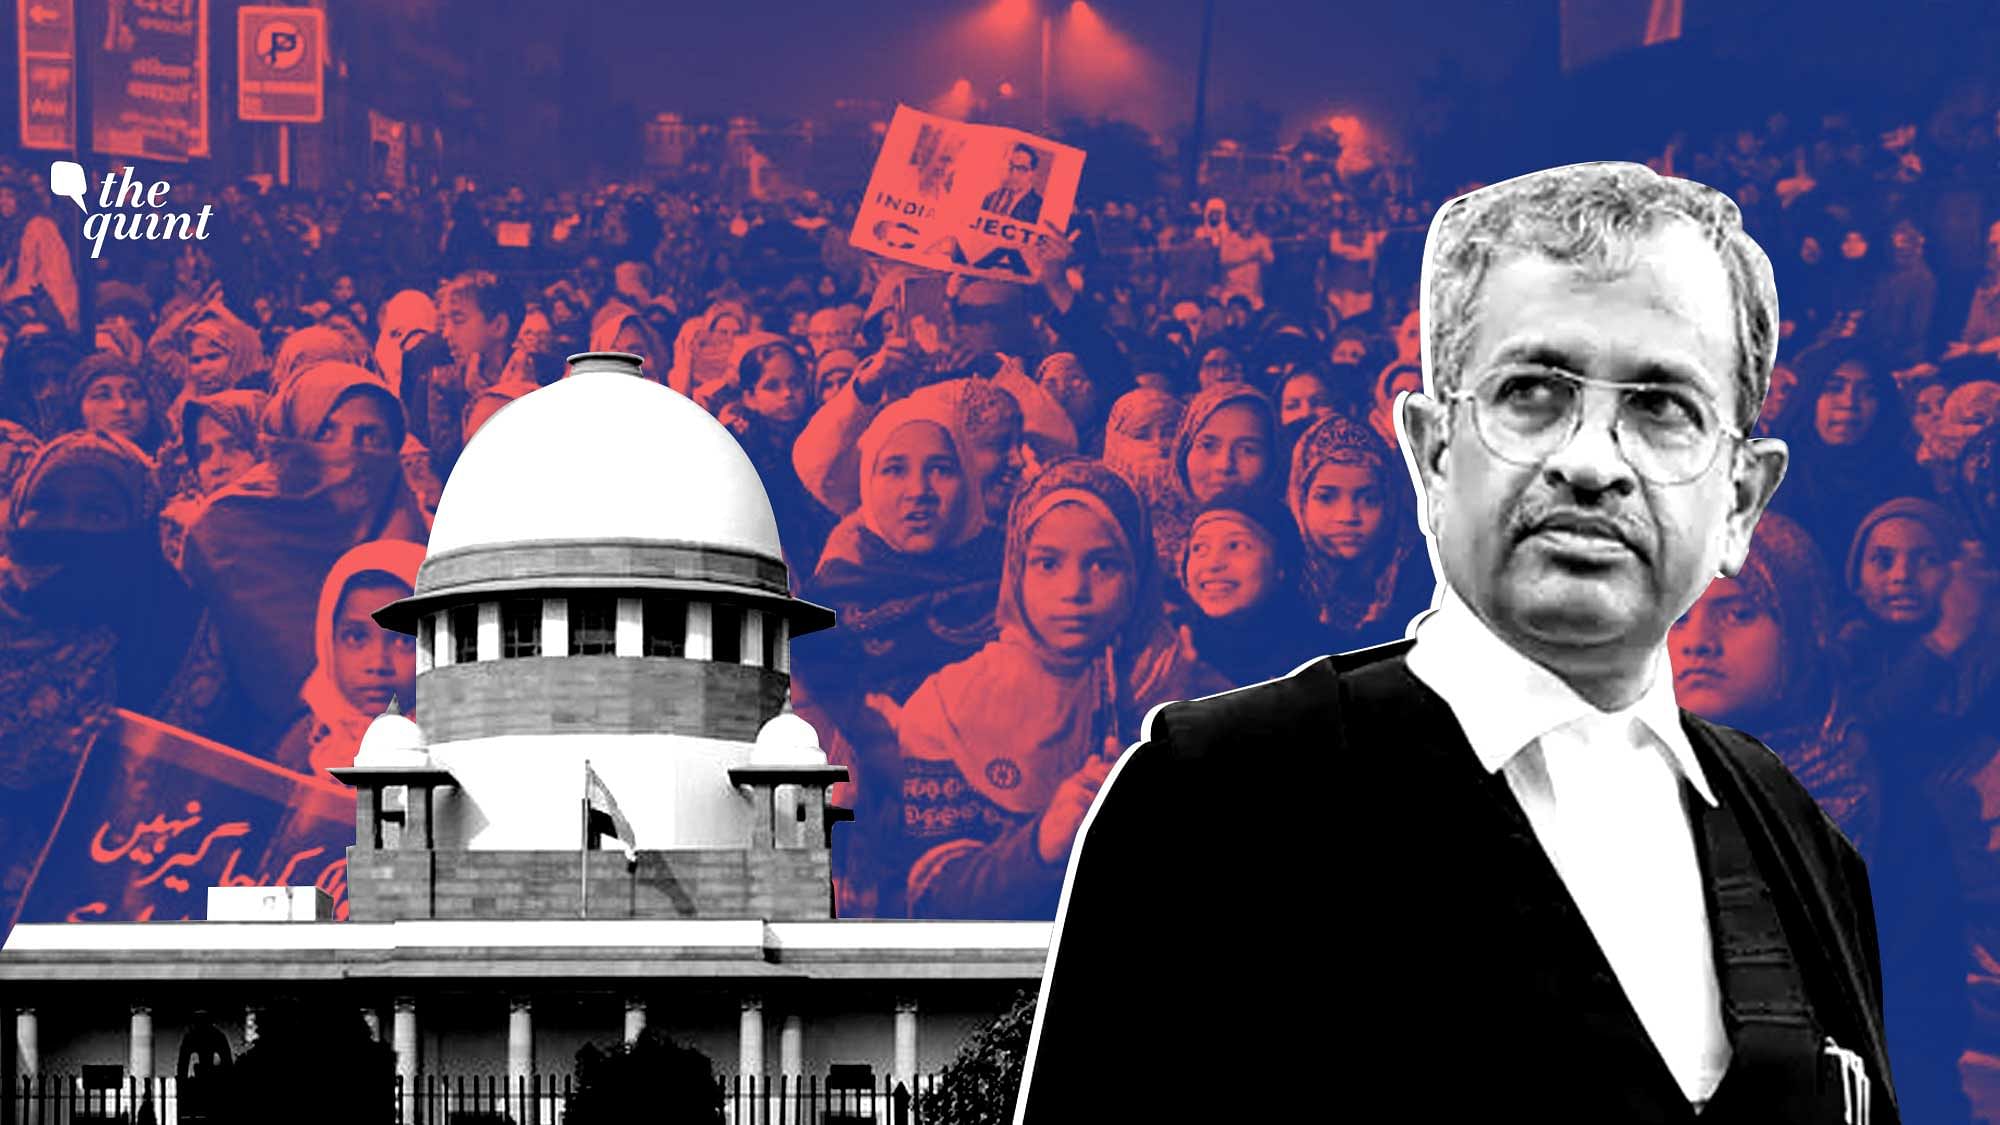 The Supreme Court has appointed senior advocate Sanjay Hegde (pictured) and advocate Sadhana Ramachandran to speak to the protesters about moving to an alternate site.